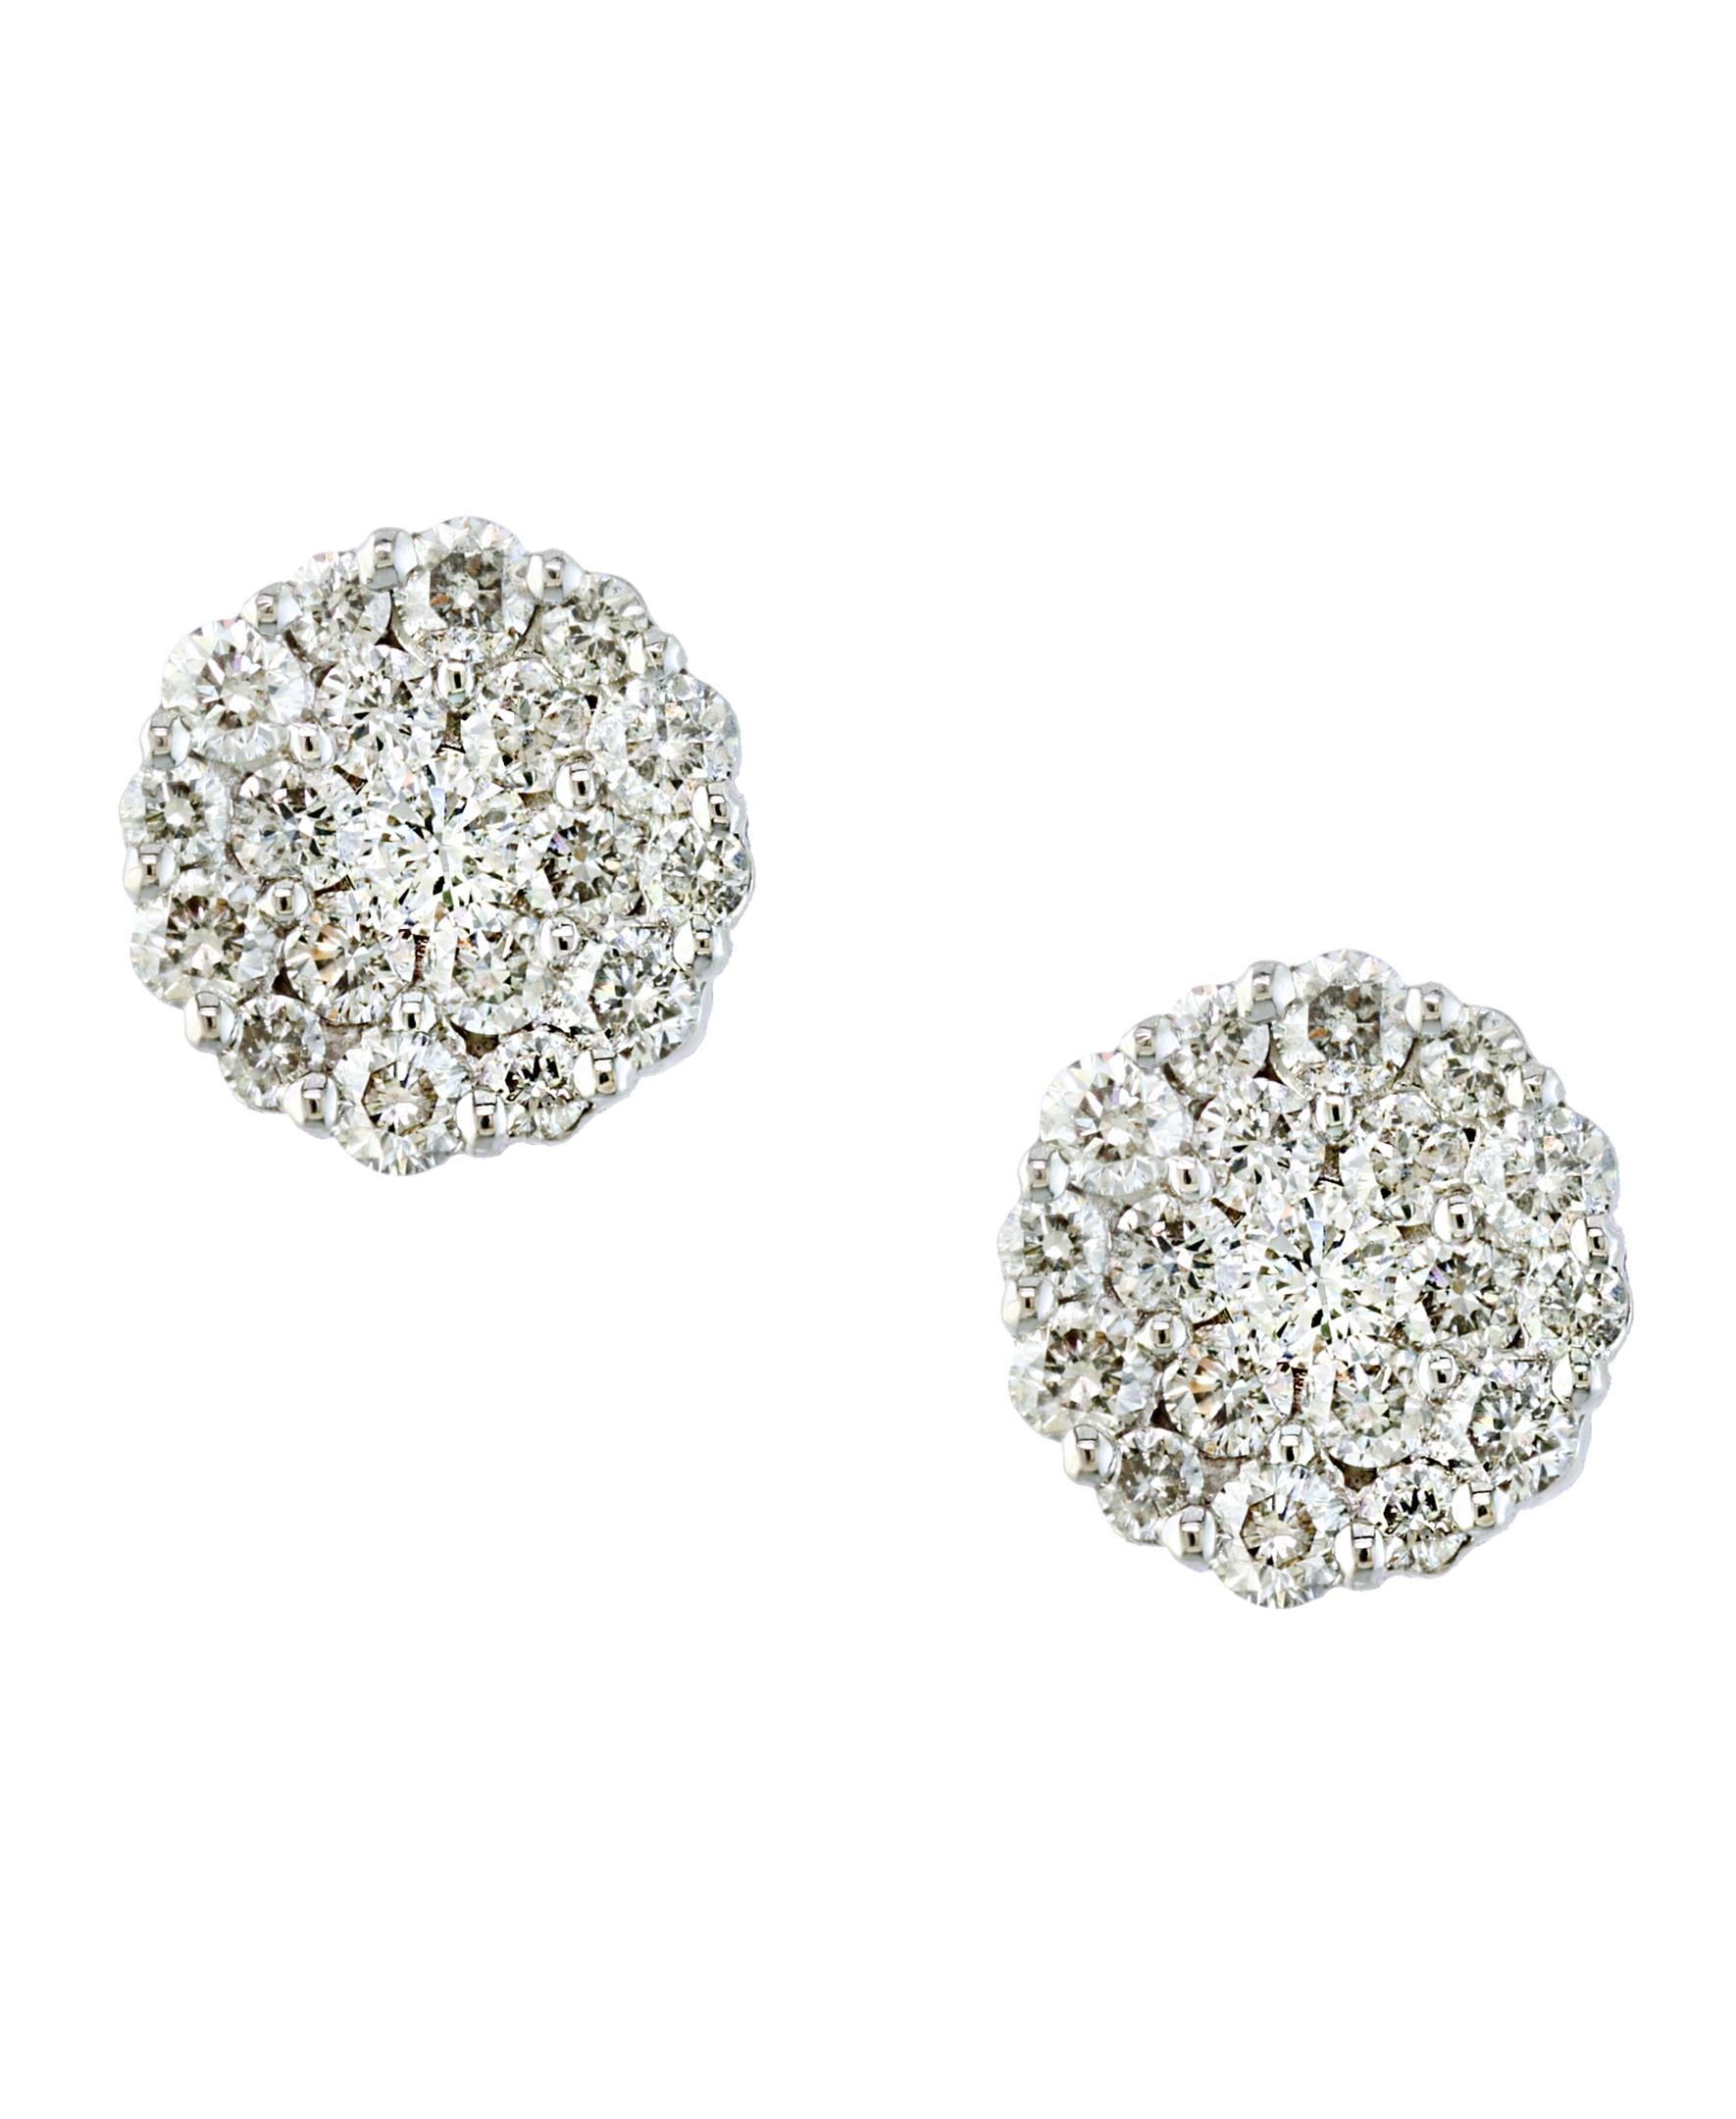 A sweet, shimmery style for any day of the week. These stud earrings blossom floral clusters of   Approximately 1.6 ct. t.w. round brilliant-cut diamonds. Set in 18 kt White gold. Post, diamond floral cluster stud earrings.
It's  a unique and